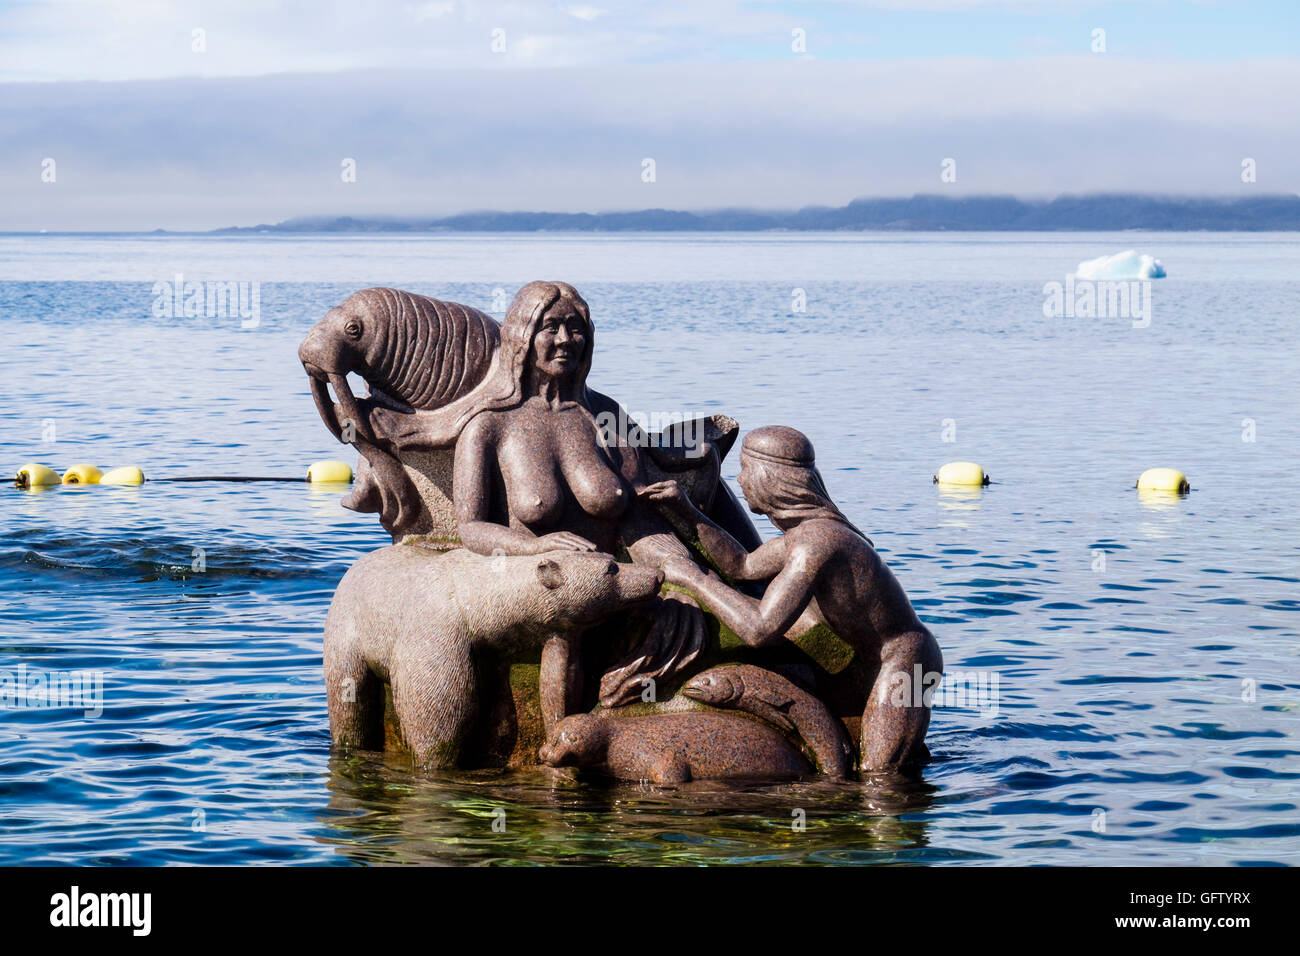 Sculpture of Sedna Inuit goddess of sea surrounded and immersed in seawater in Colonial Harbour (Kolonihavnen). Nuuk Greenland Stock Photo